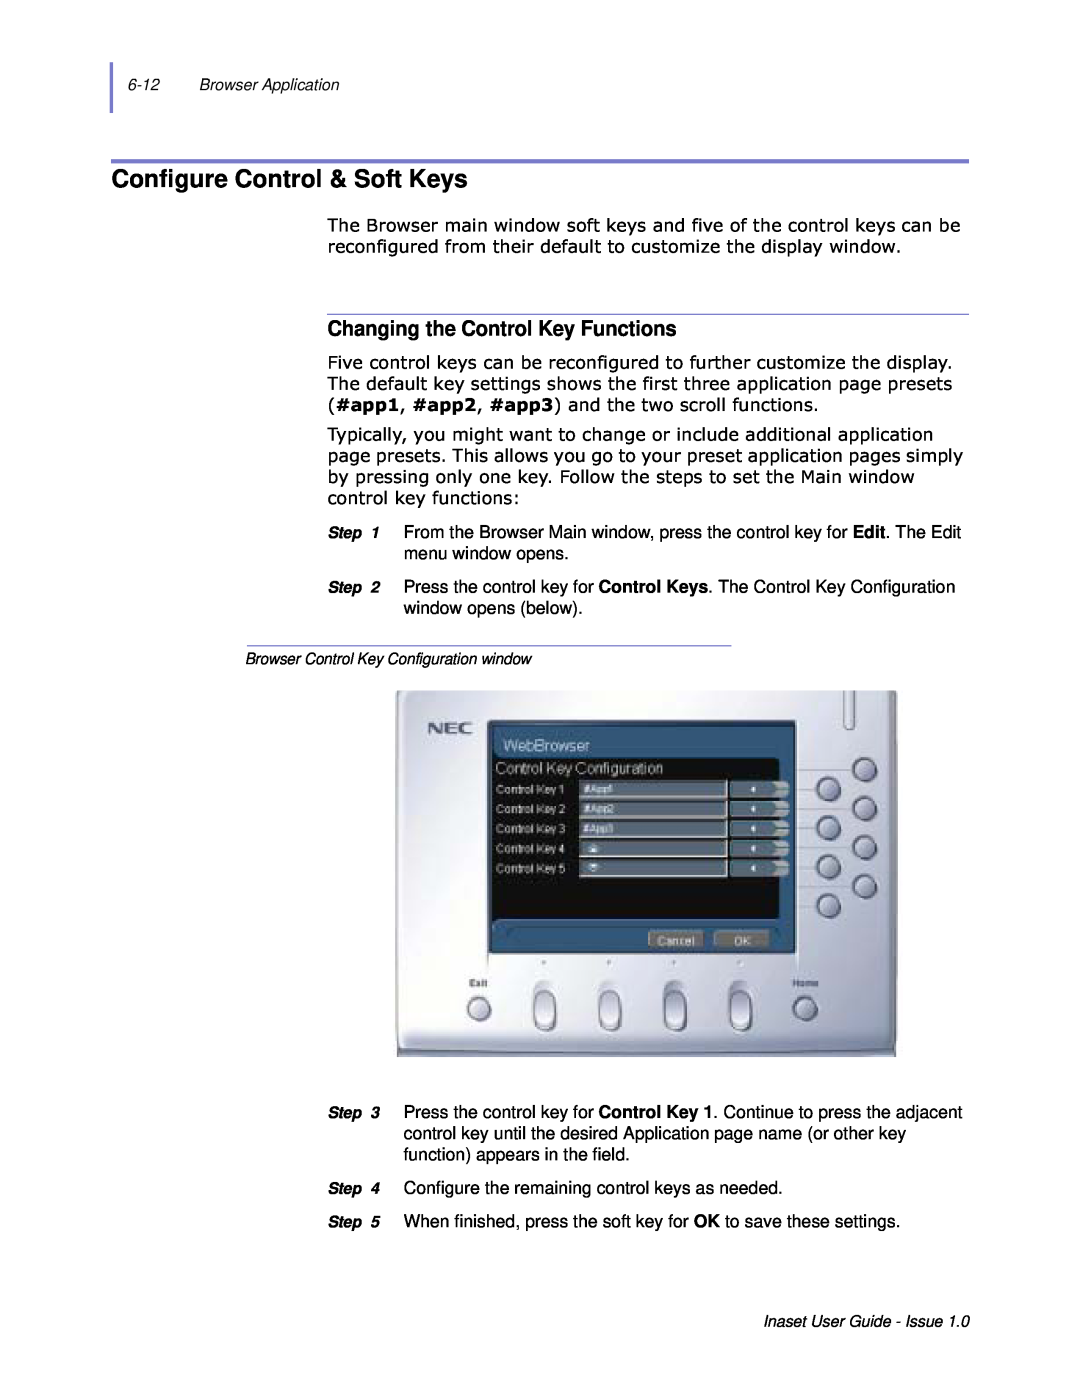 NEC NEAX 2000 IPS manual Configure Control & Soft Keys, Changing the Control Key Functions 